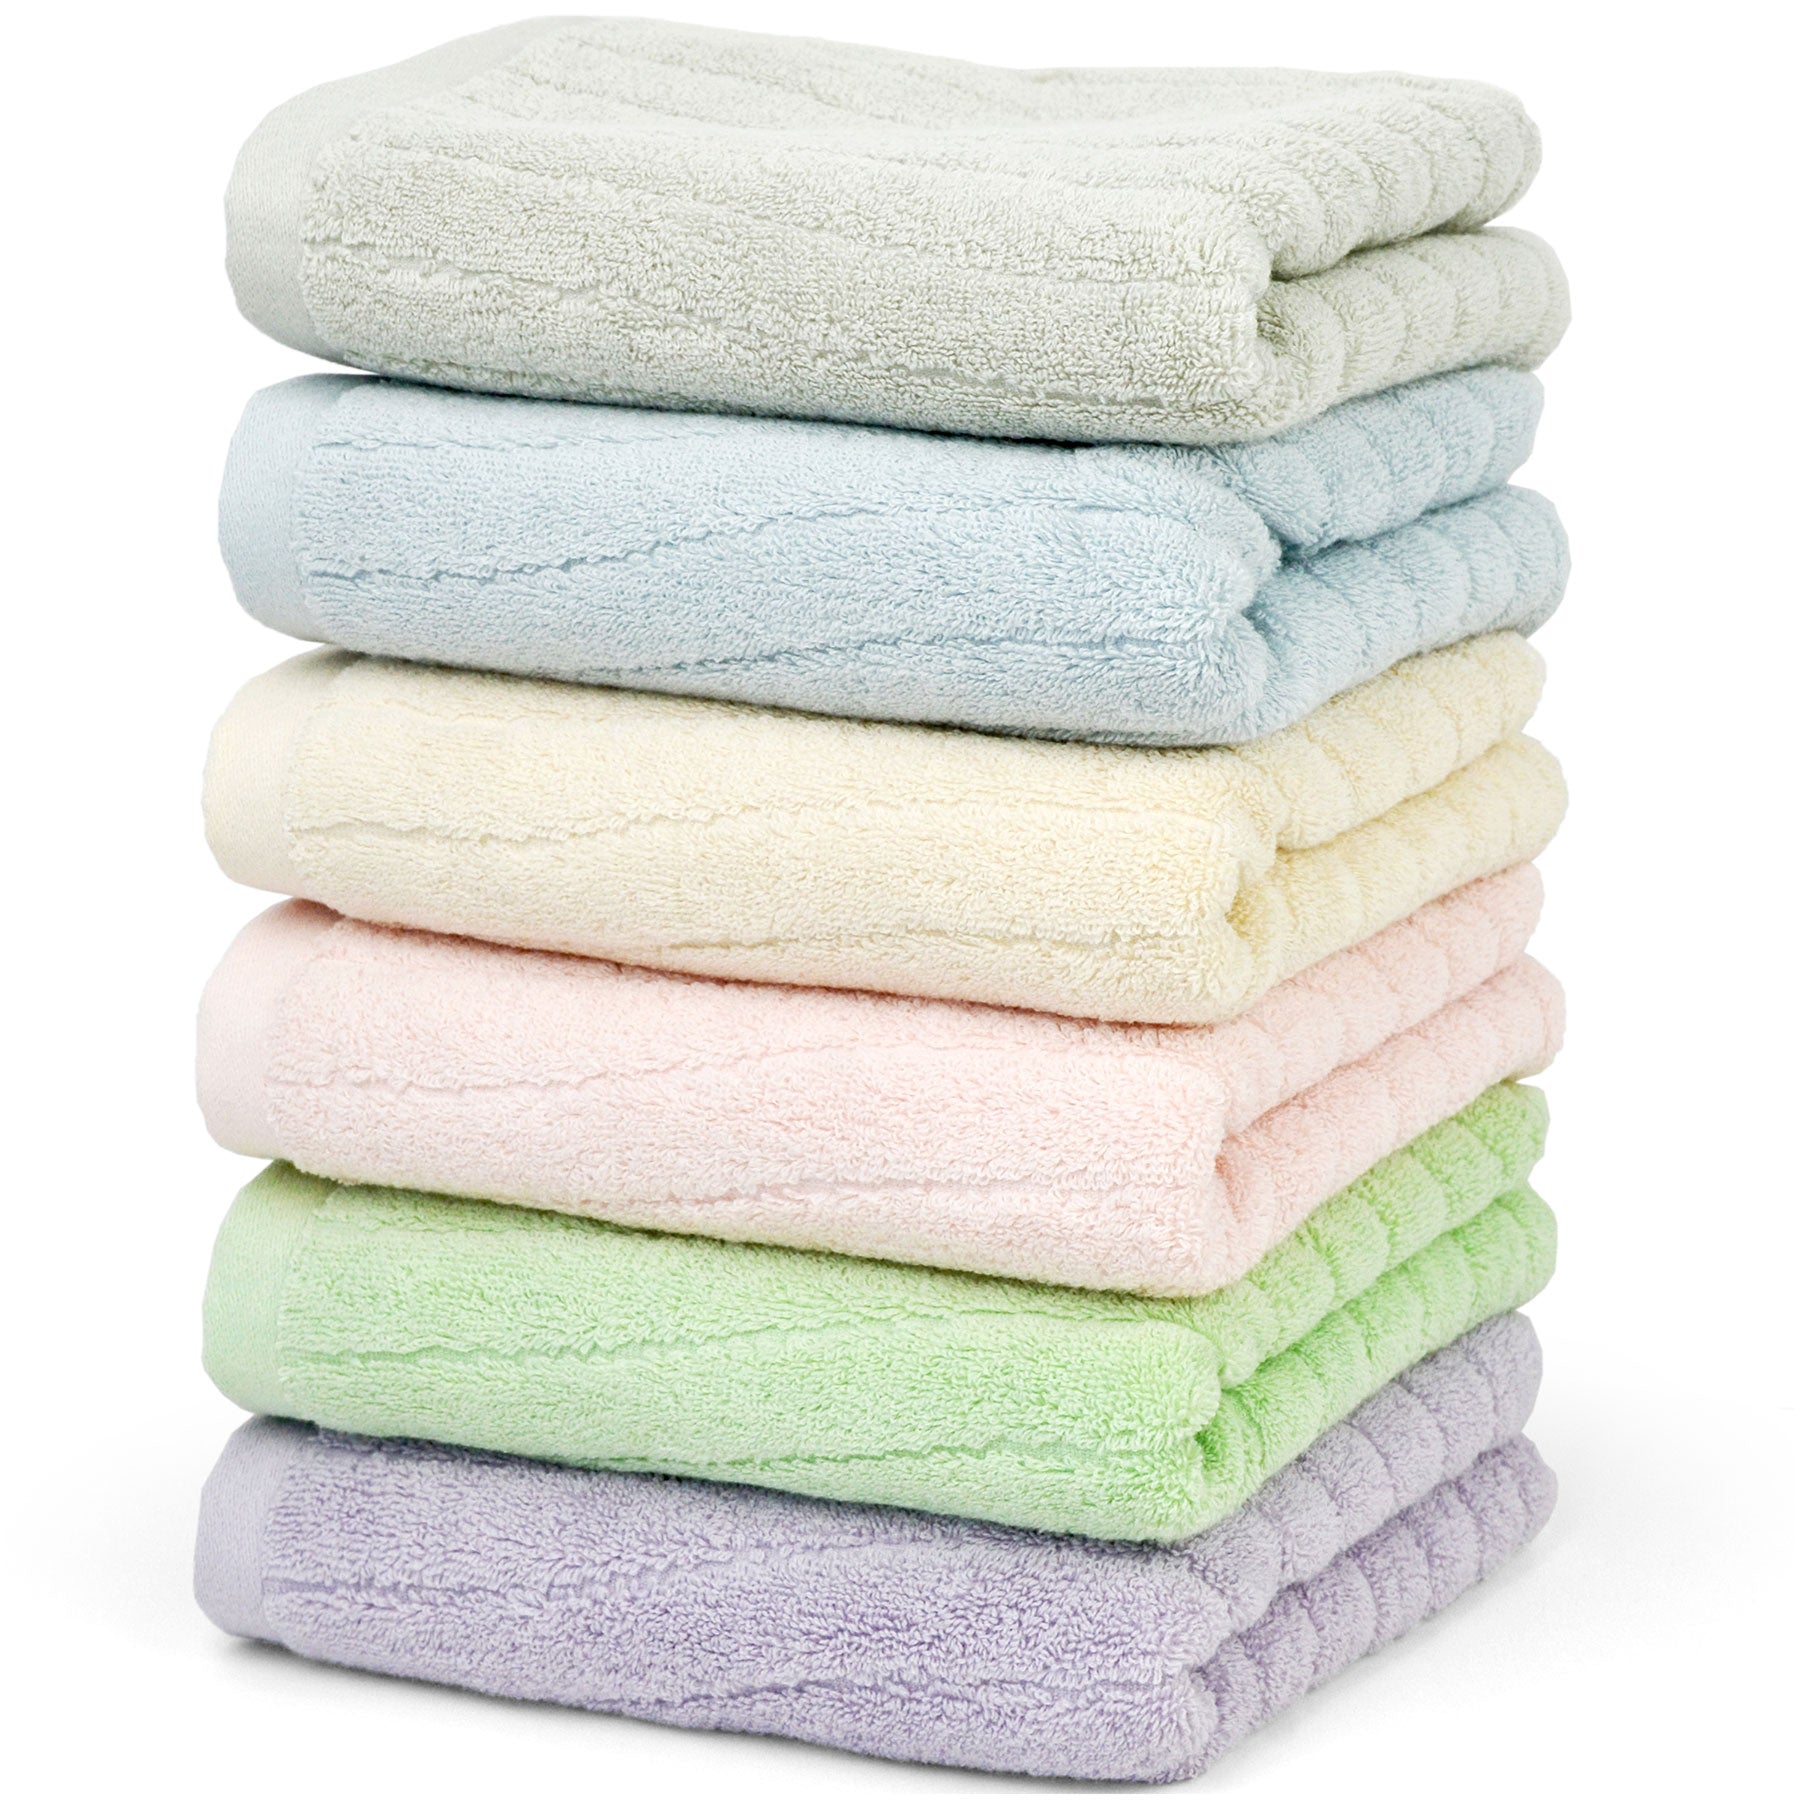 Cleanbear Assorted-Colors-Hand Towels-Set of 6, Wavy Line Design for Bathroom Decoration, Soft and Fluffy Bathroom Hand Towel, 29 x 13 Inches (New Arrival)